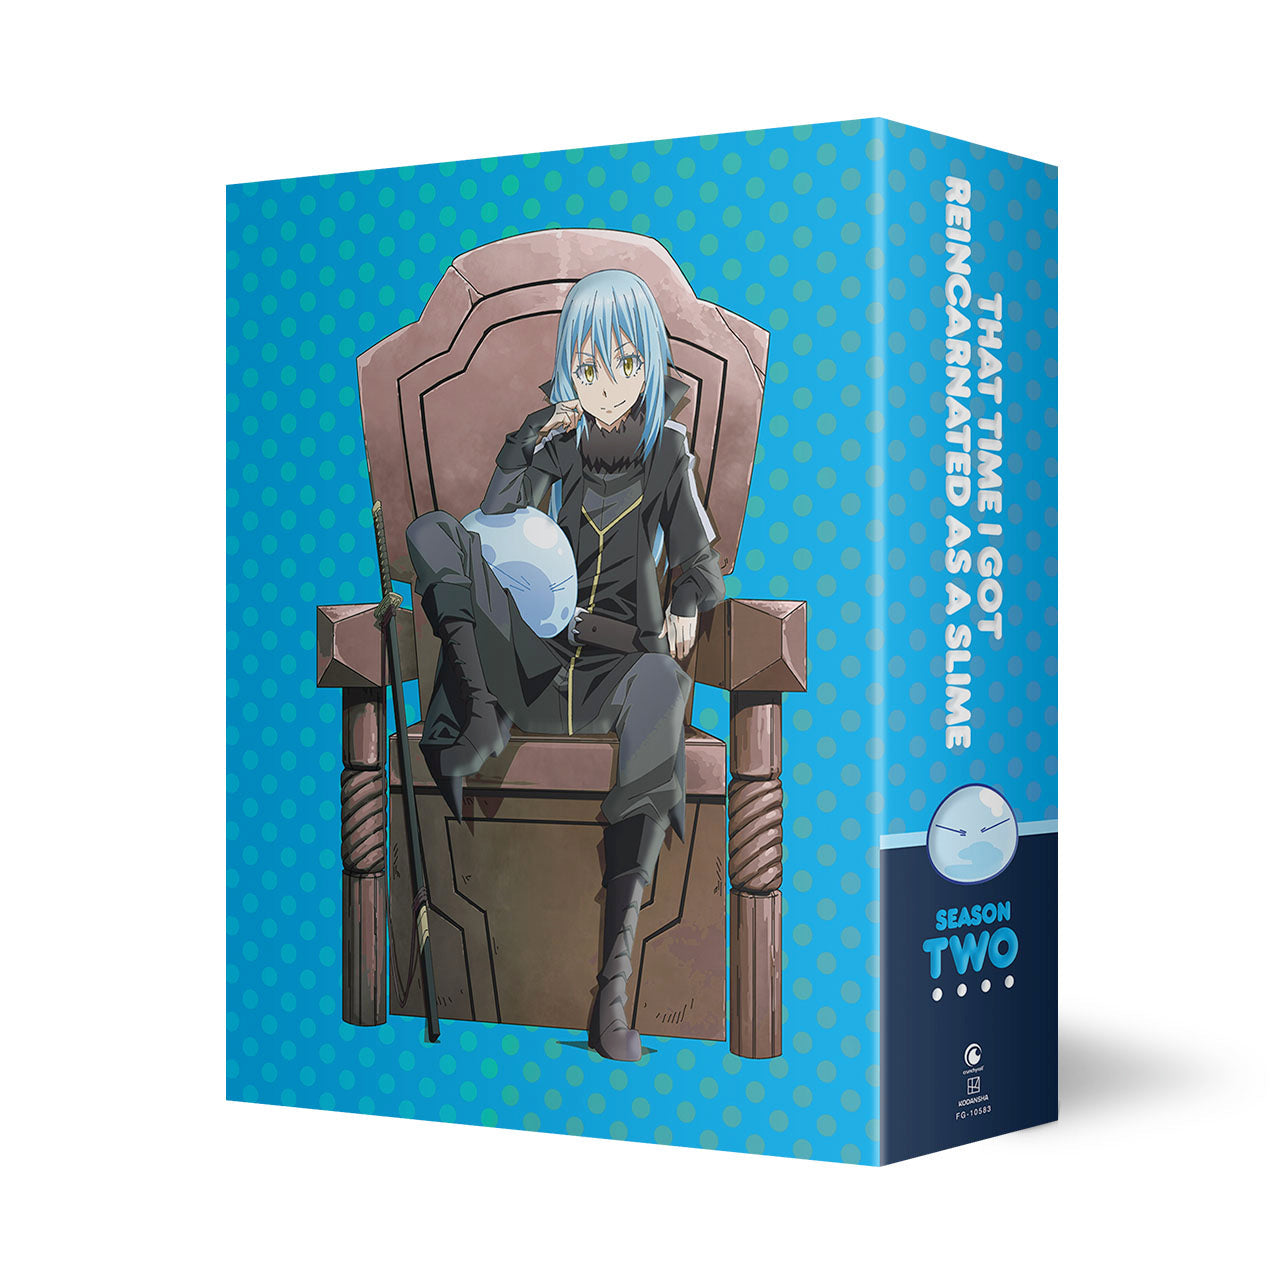 That Time I Got Reincarnated as a Slime - Season 2 Part 2 - BD/DVD - LE image count 3